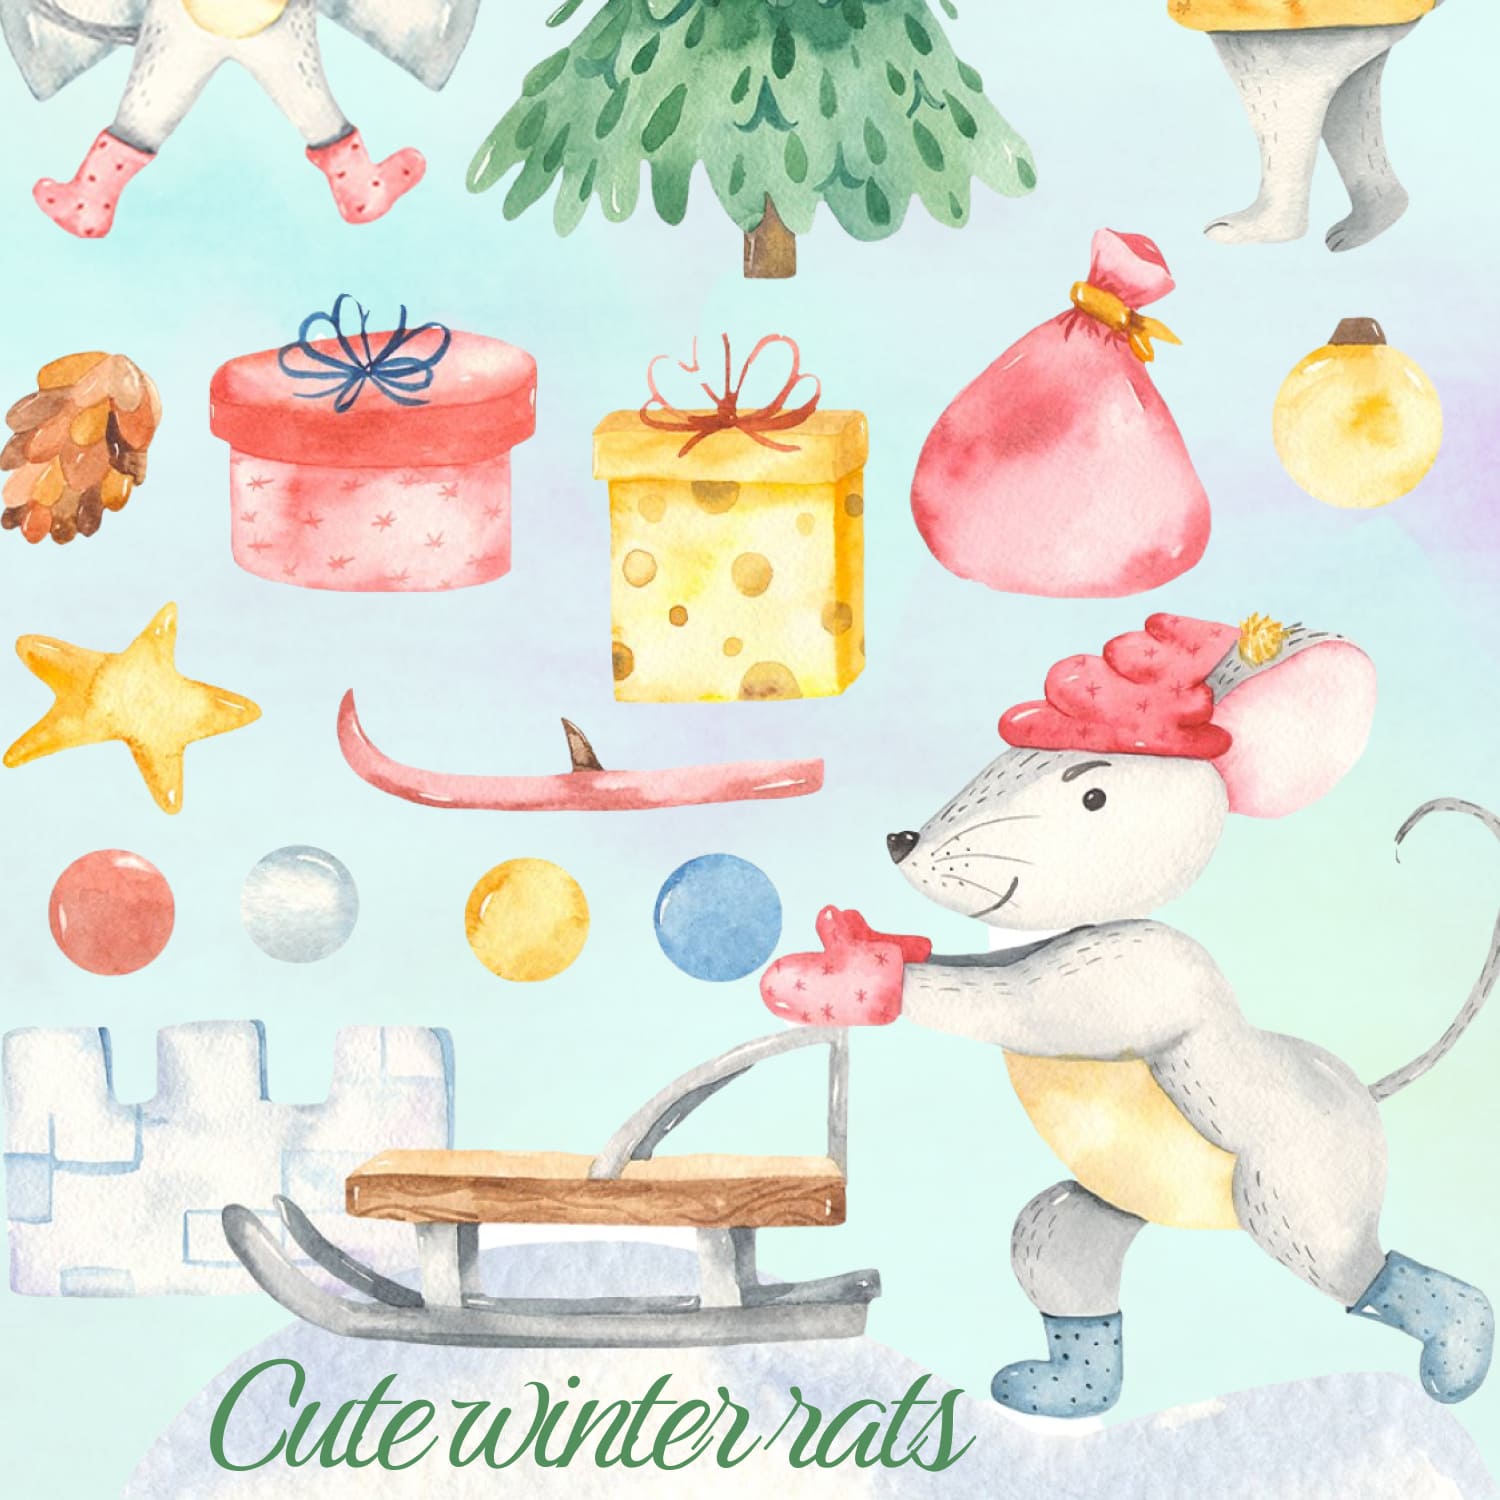 The collection includes: cute characters of rats, snowman, Christmas tree, sleigh, gifts and much more.